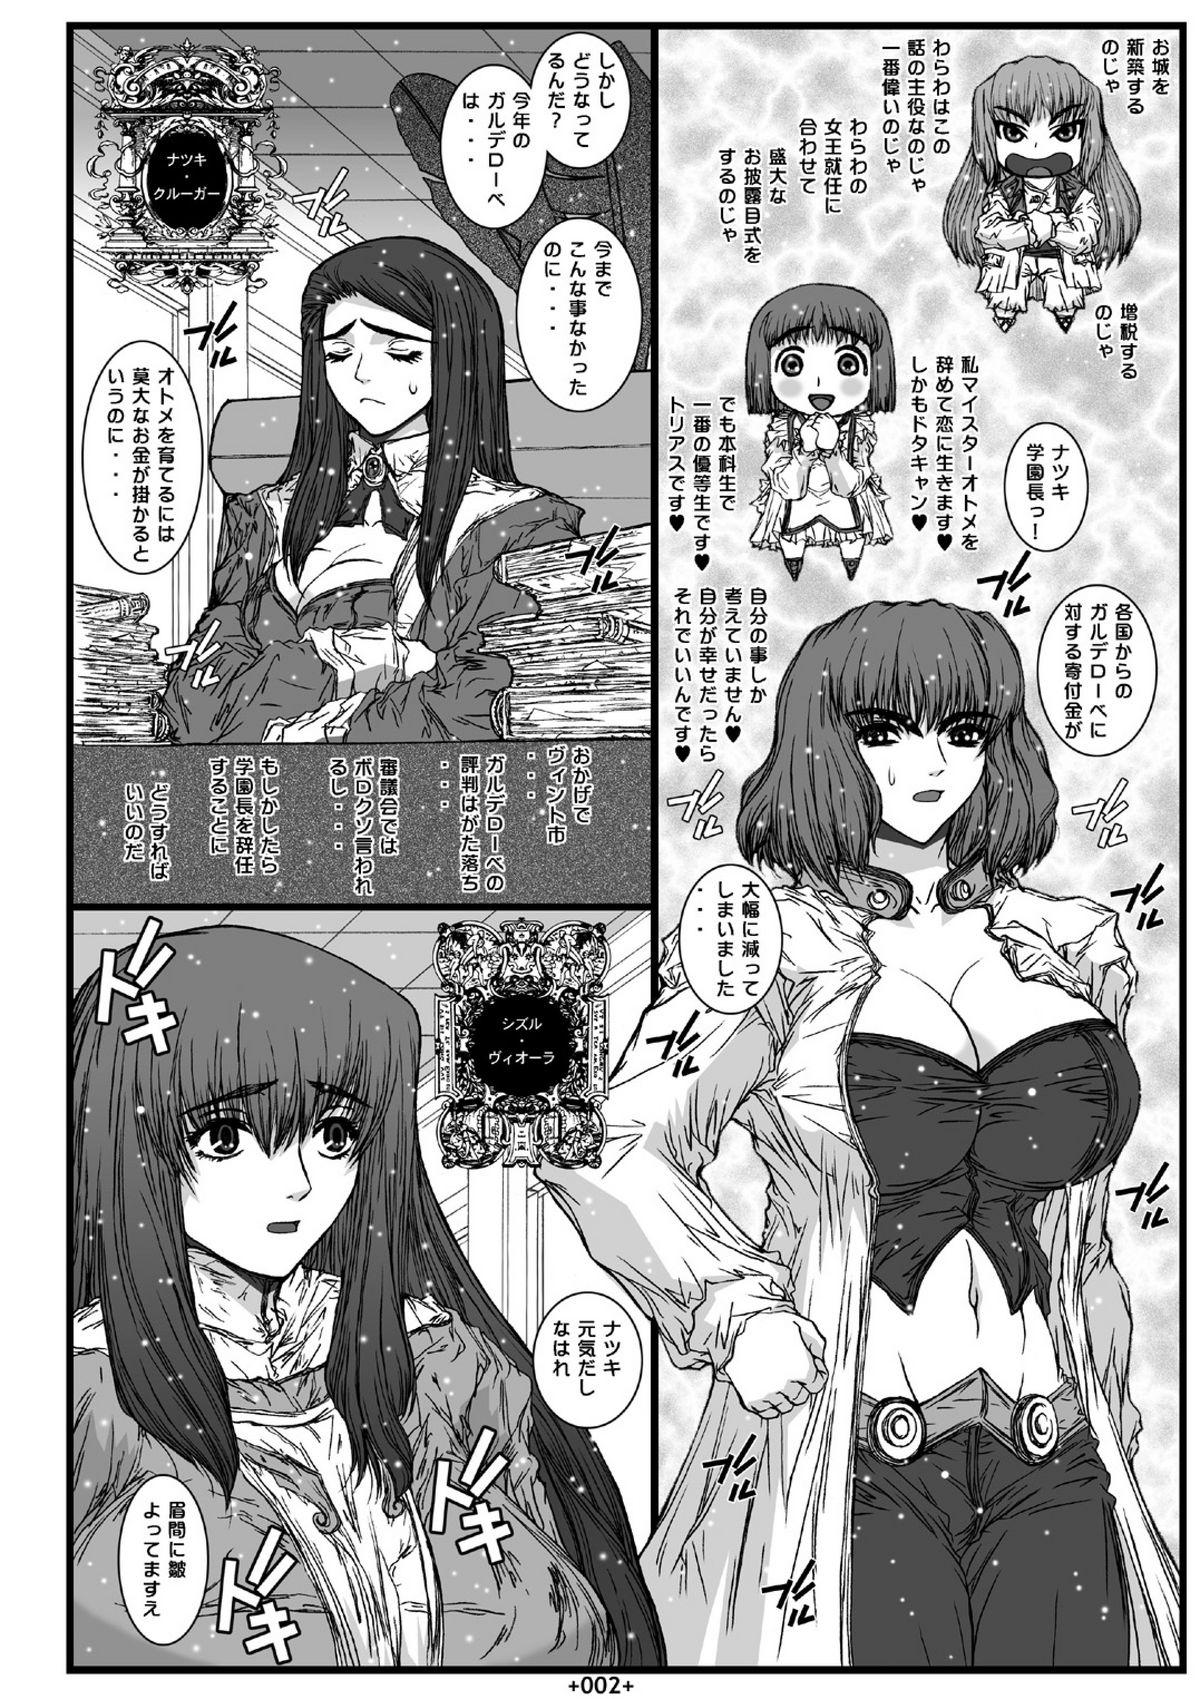 3some Mai-In 2 - Mai-otome Small Tits - Page 4